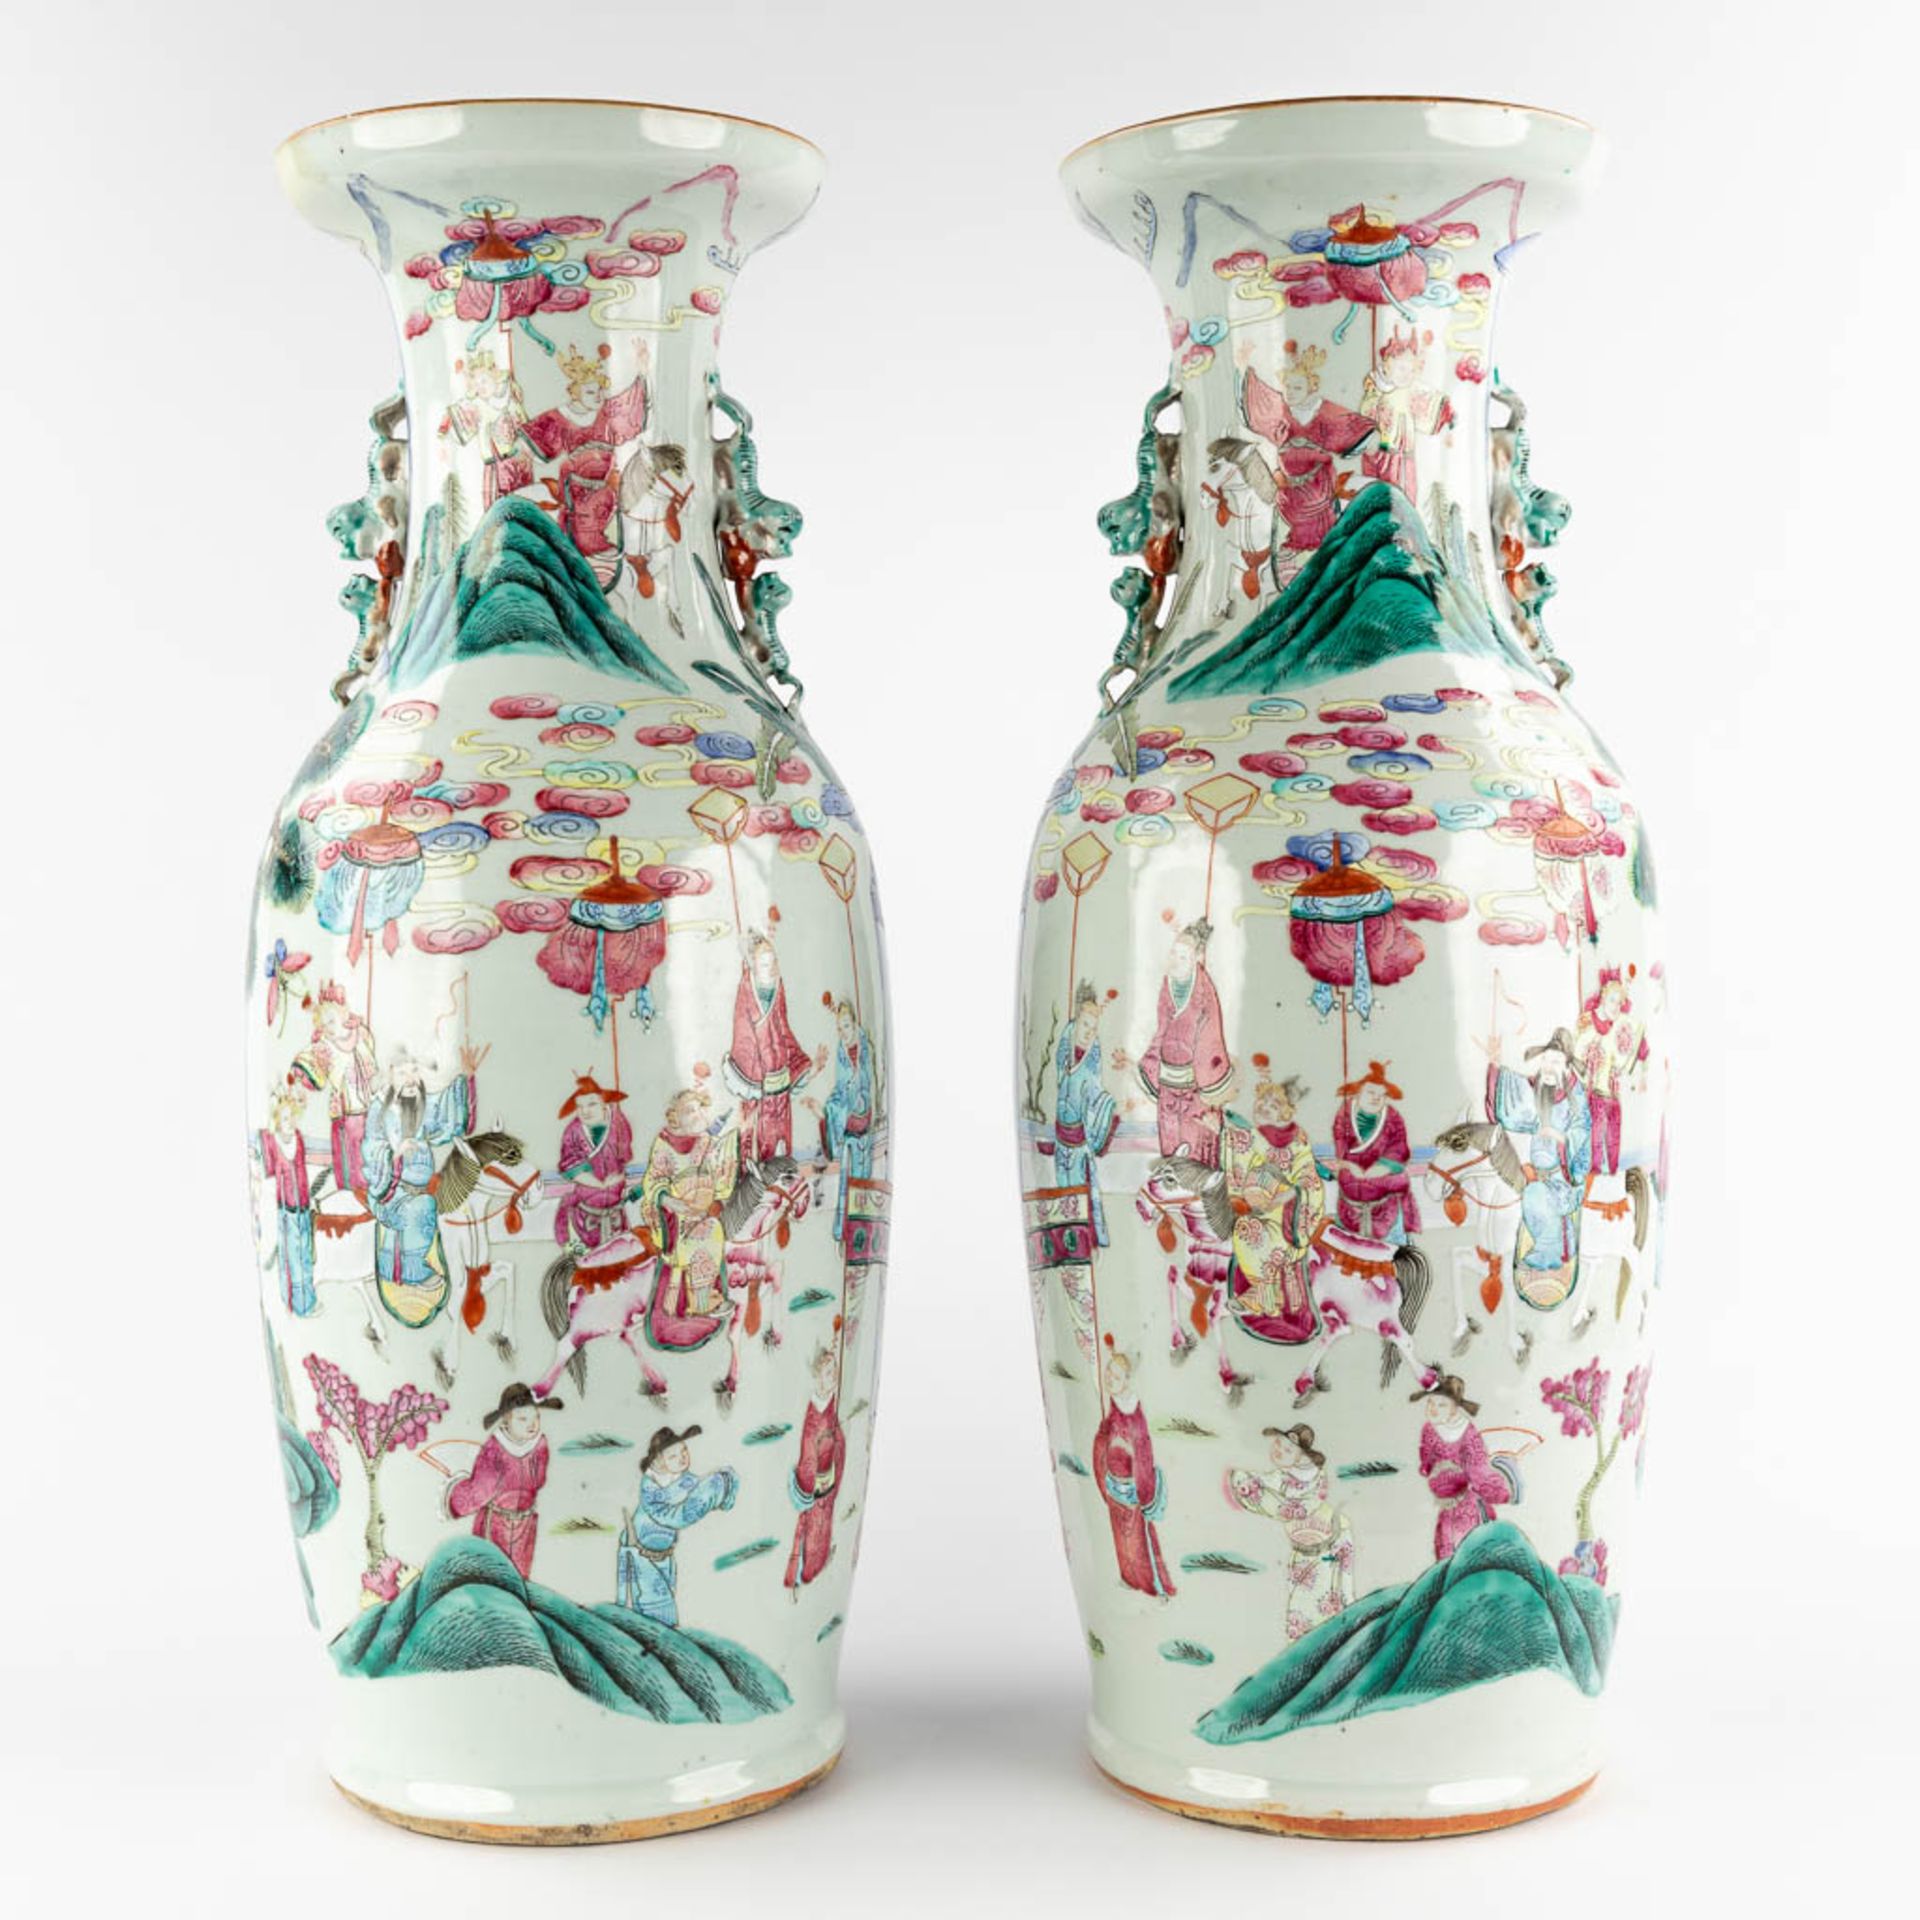 A pair of Chinese vases with Famille Rose vases with a temple scène, 19th C. (H:61 x D:23 cm) - Image 4 of 12